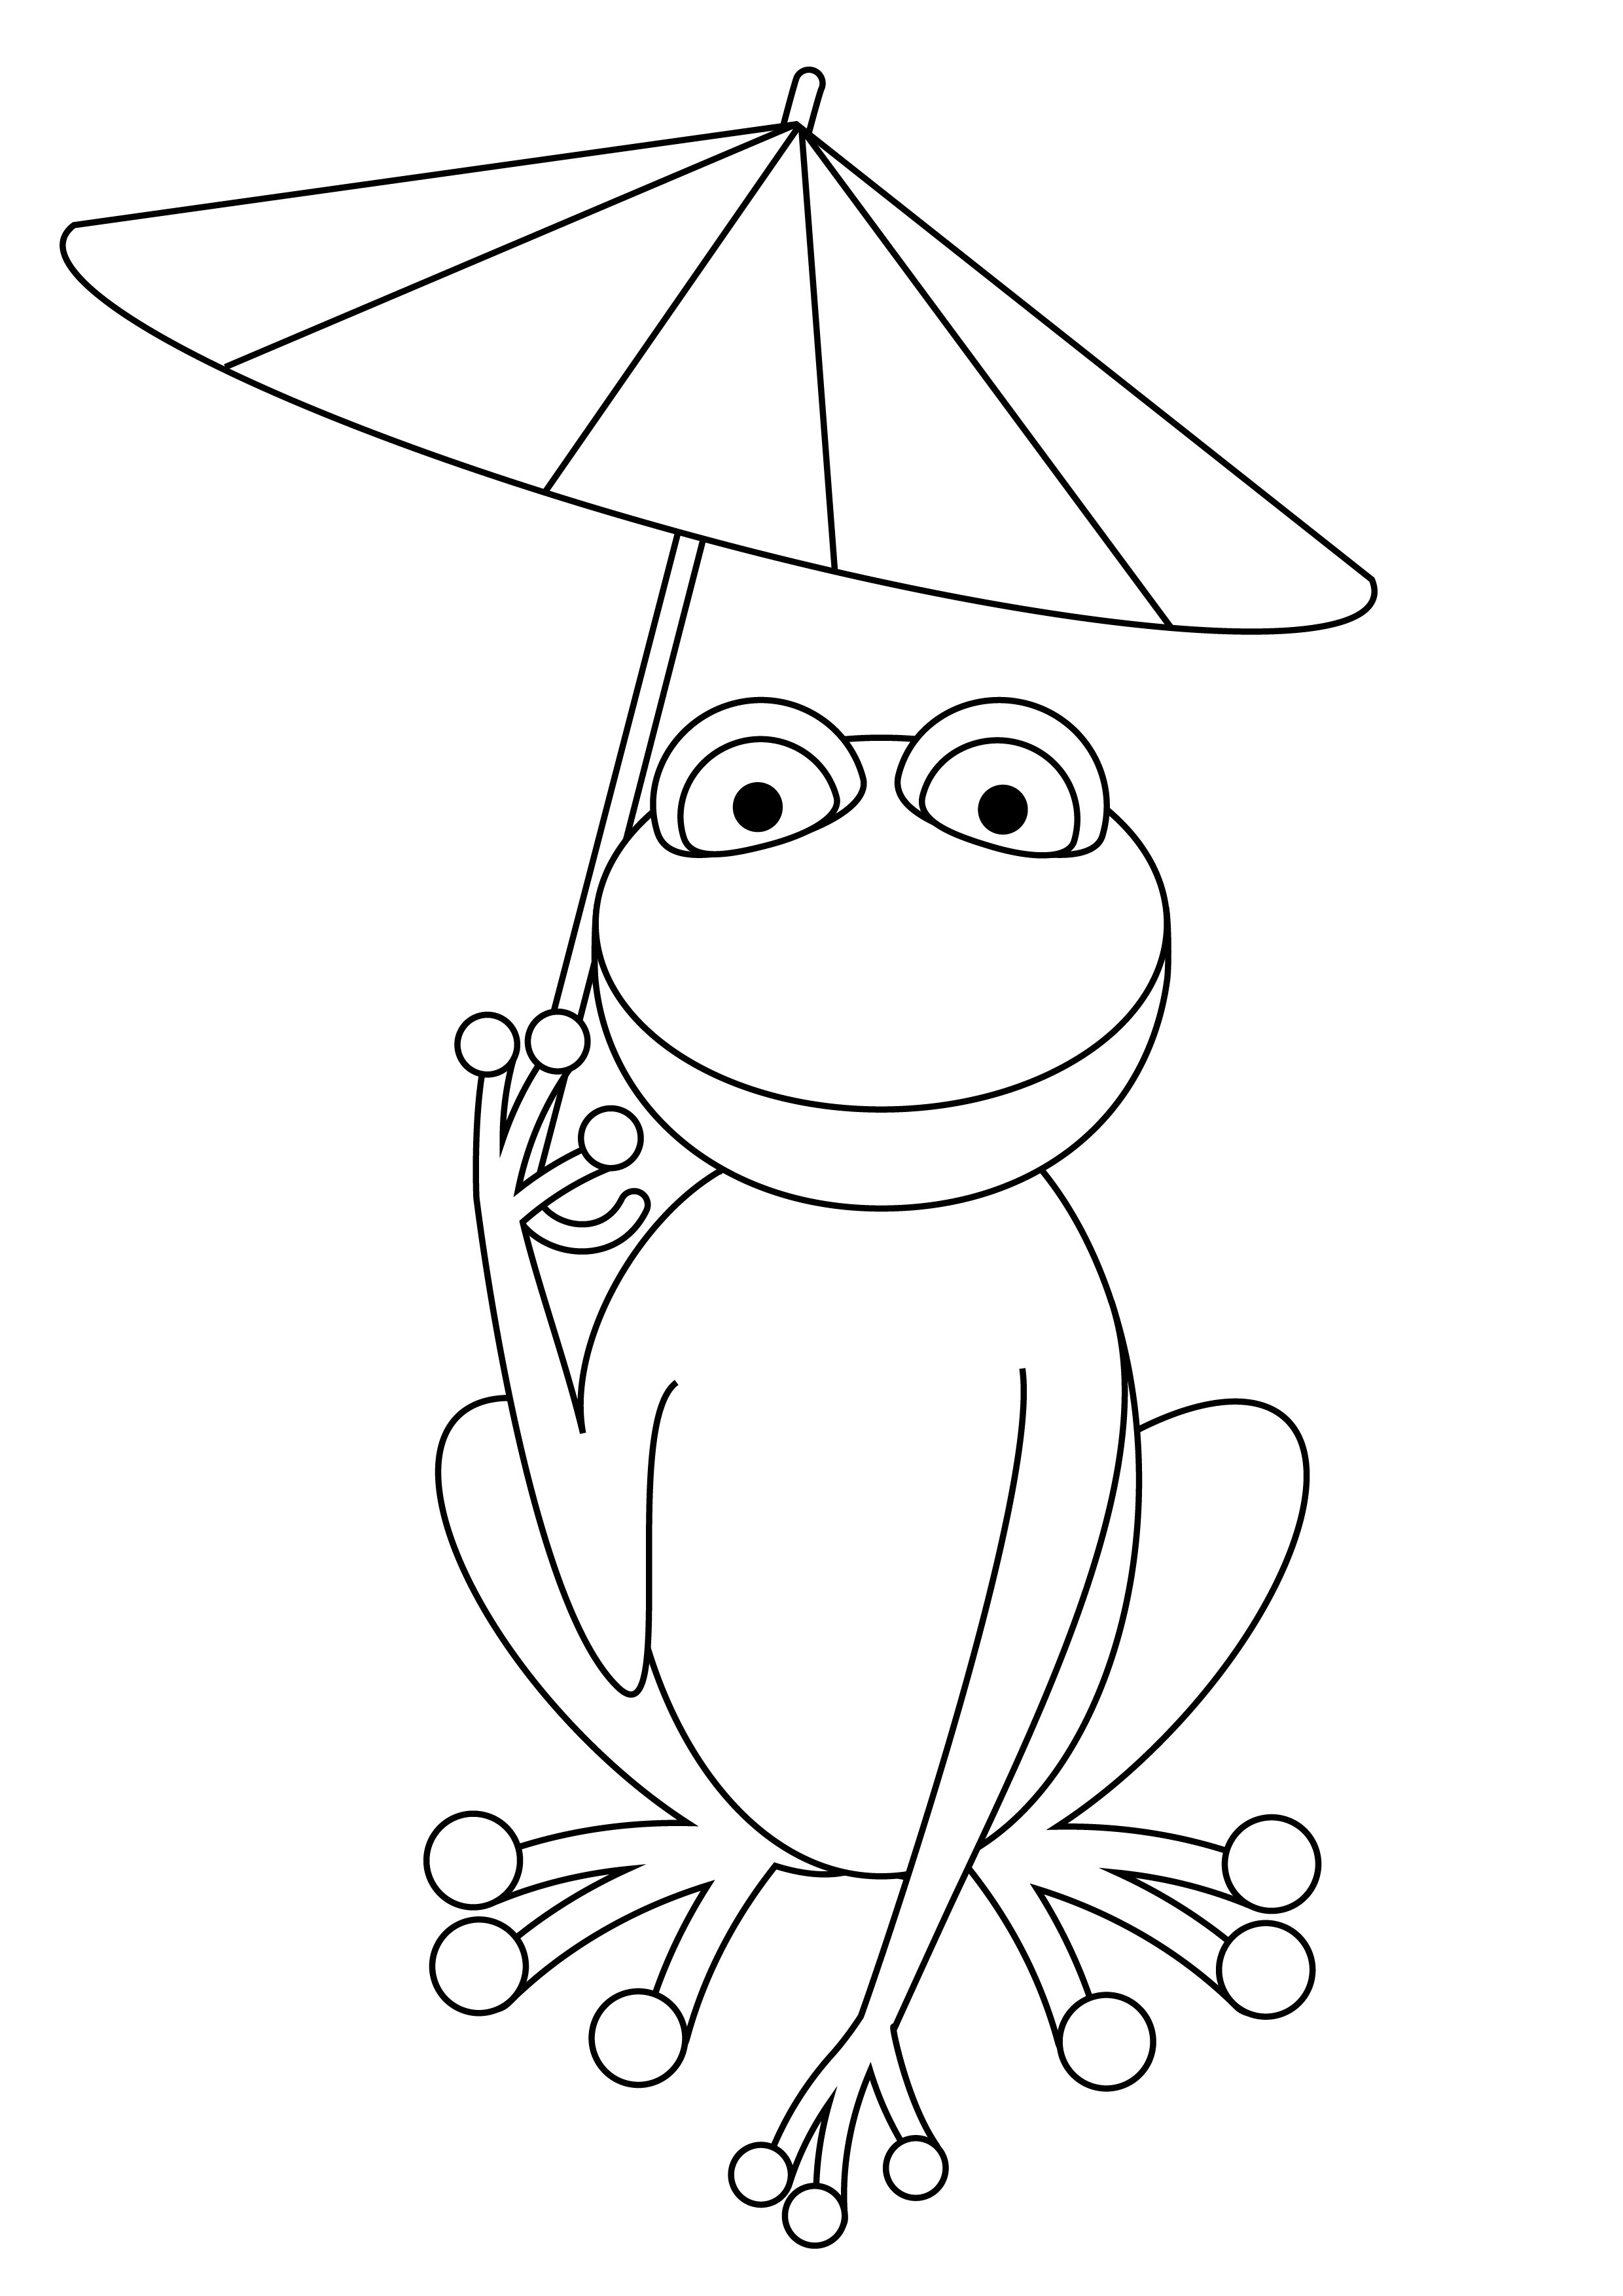 190+ Frog Coloring Page Designs 188